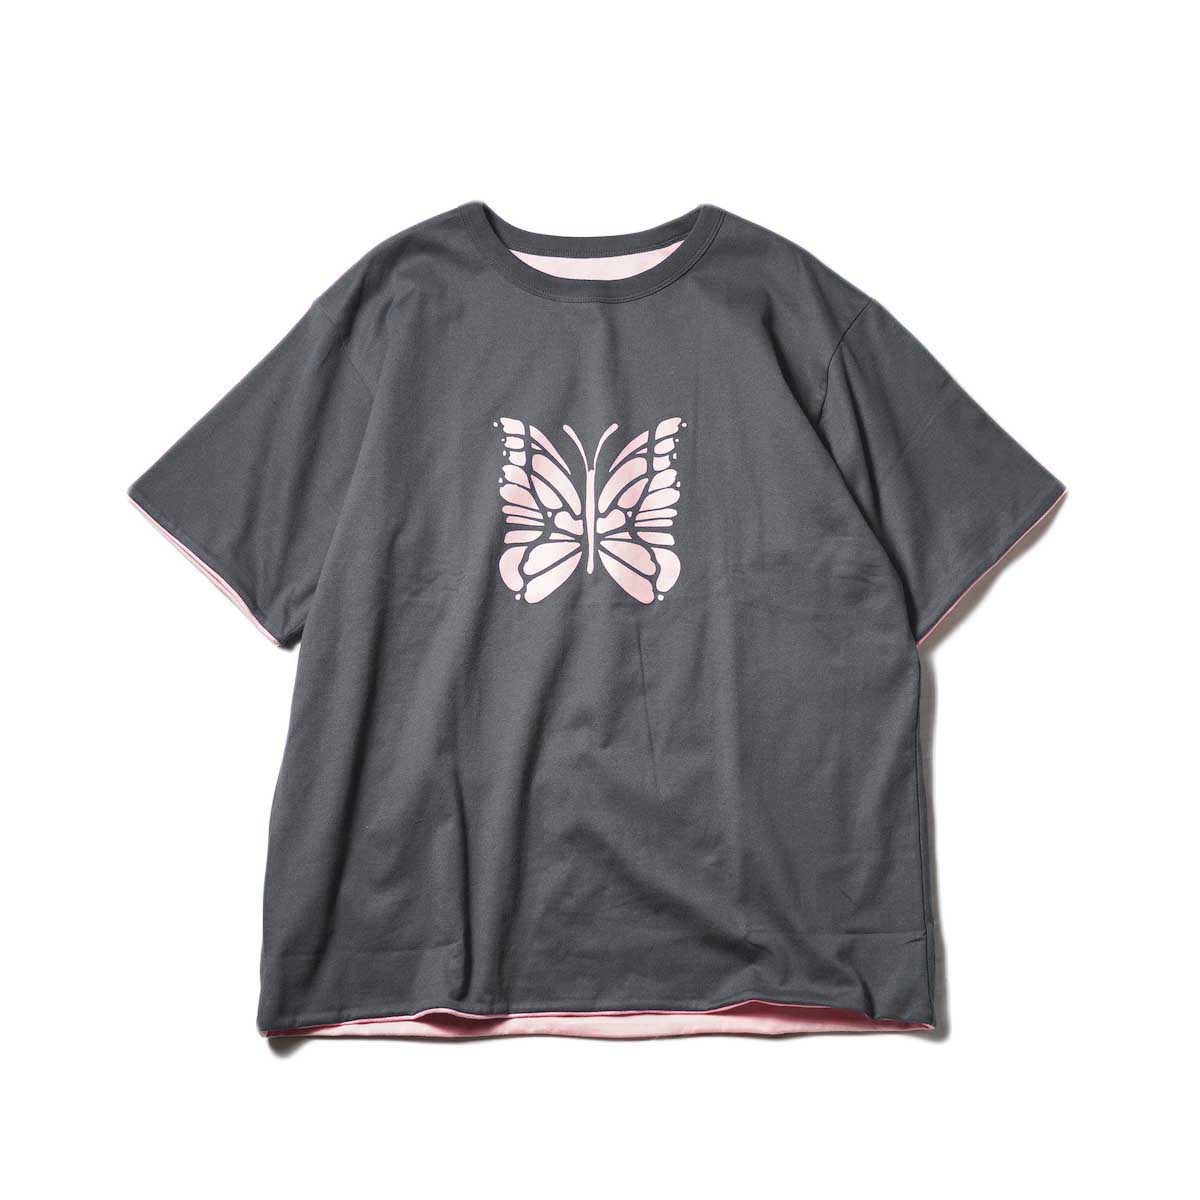 Needles / S/S Reversible Tee - Cotton Jersey (Charcoal)